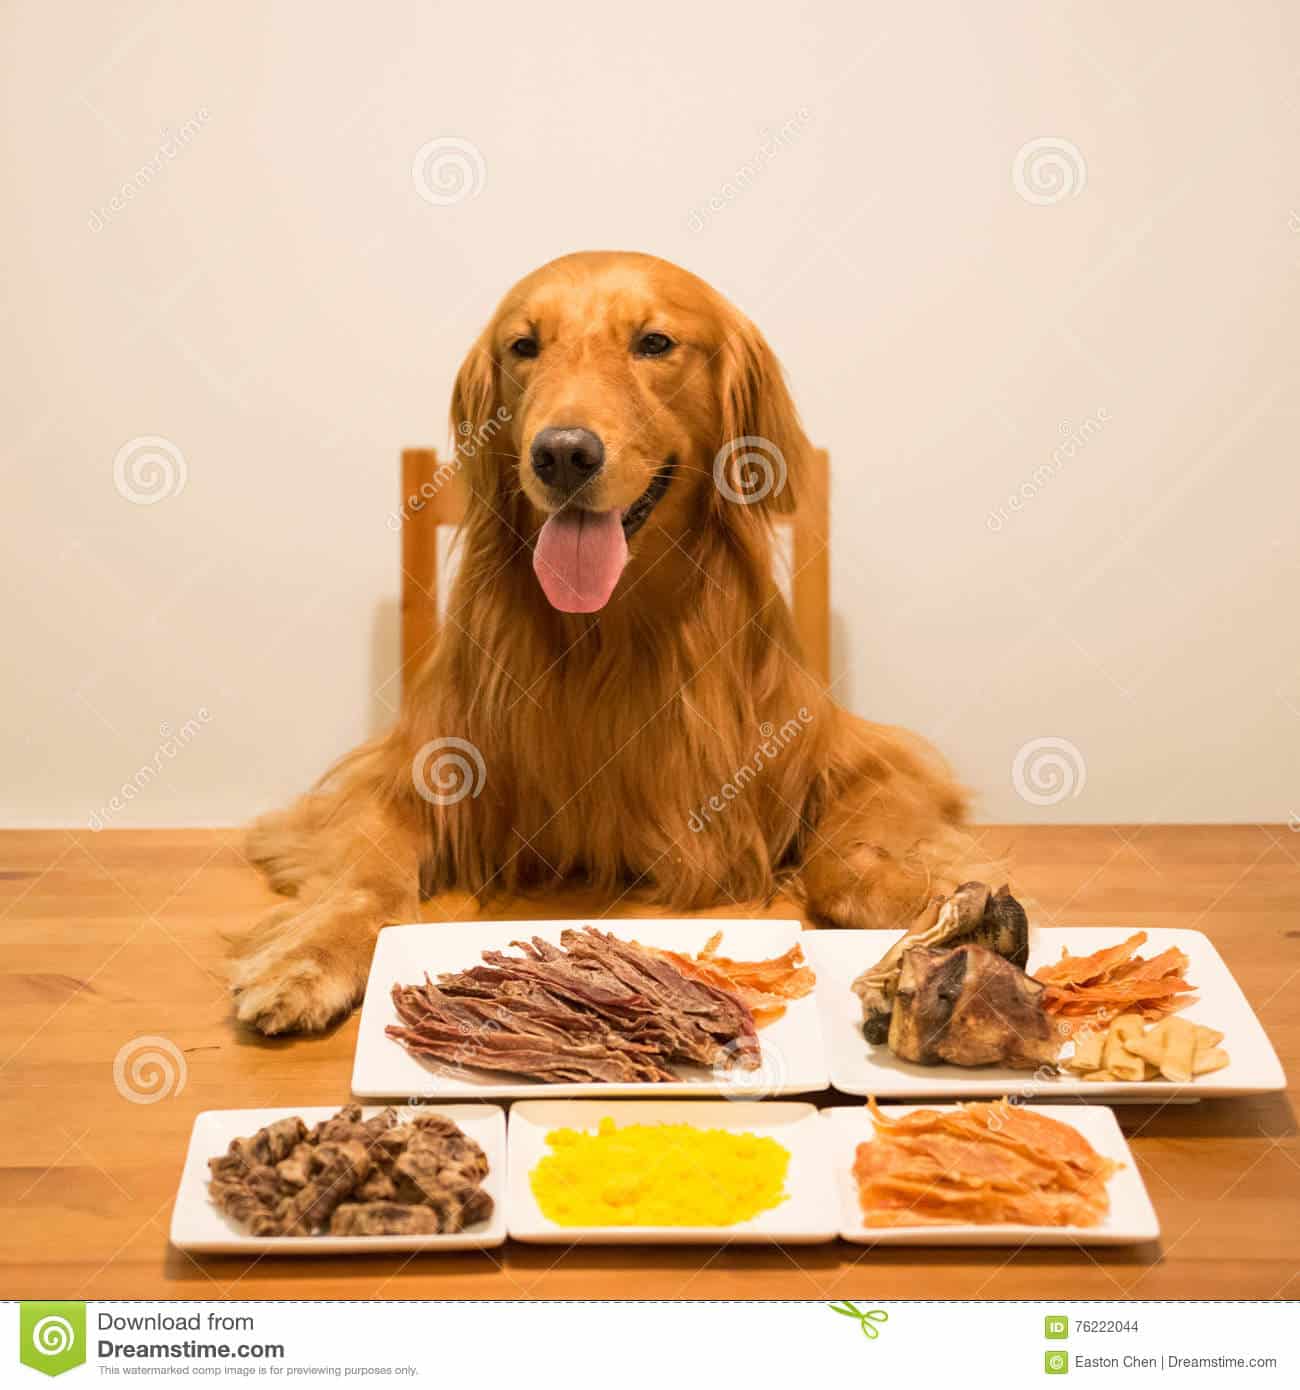 Golden Retriever Eating at the Table Stock Photo